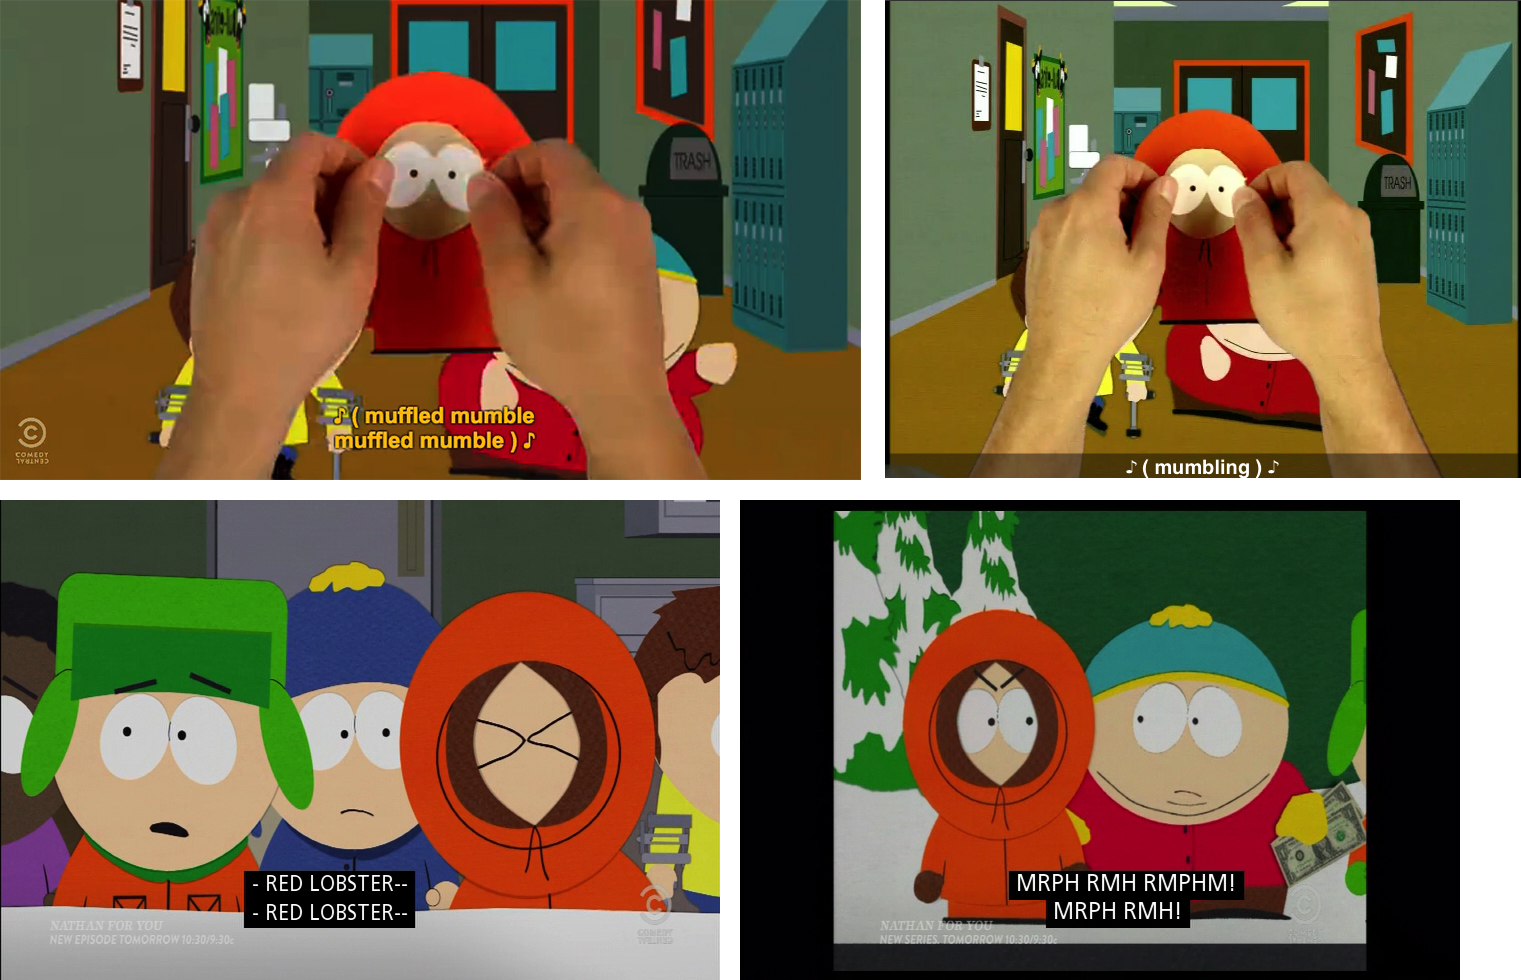 A compilation of four frames from South Park featuring Kenny. Each image presents a different caption for Kenny's muffled speech.